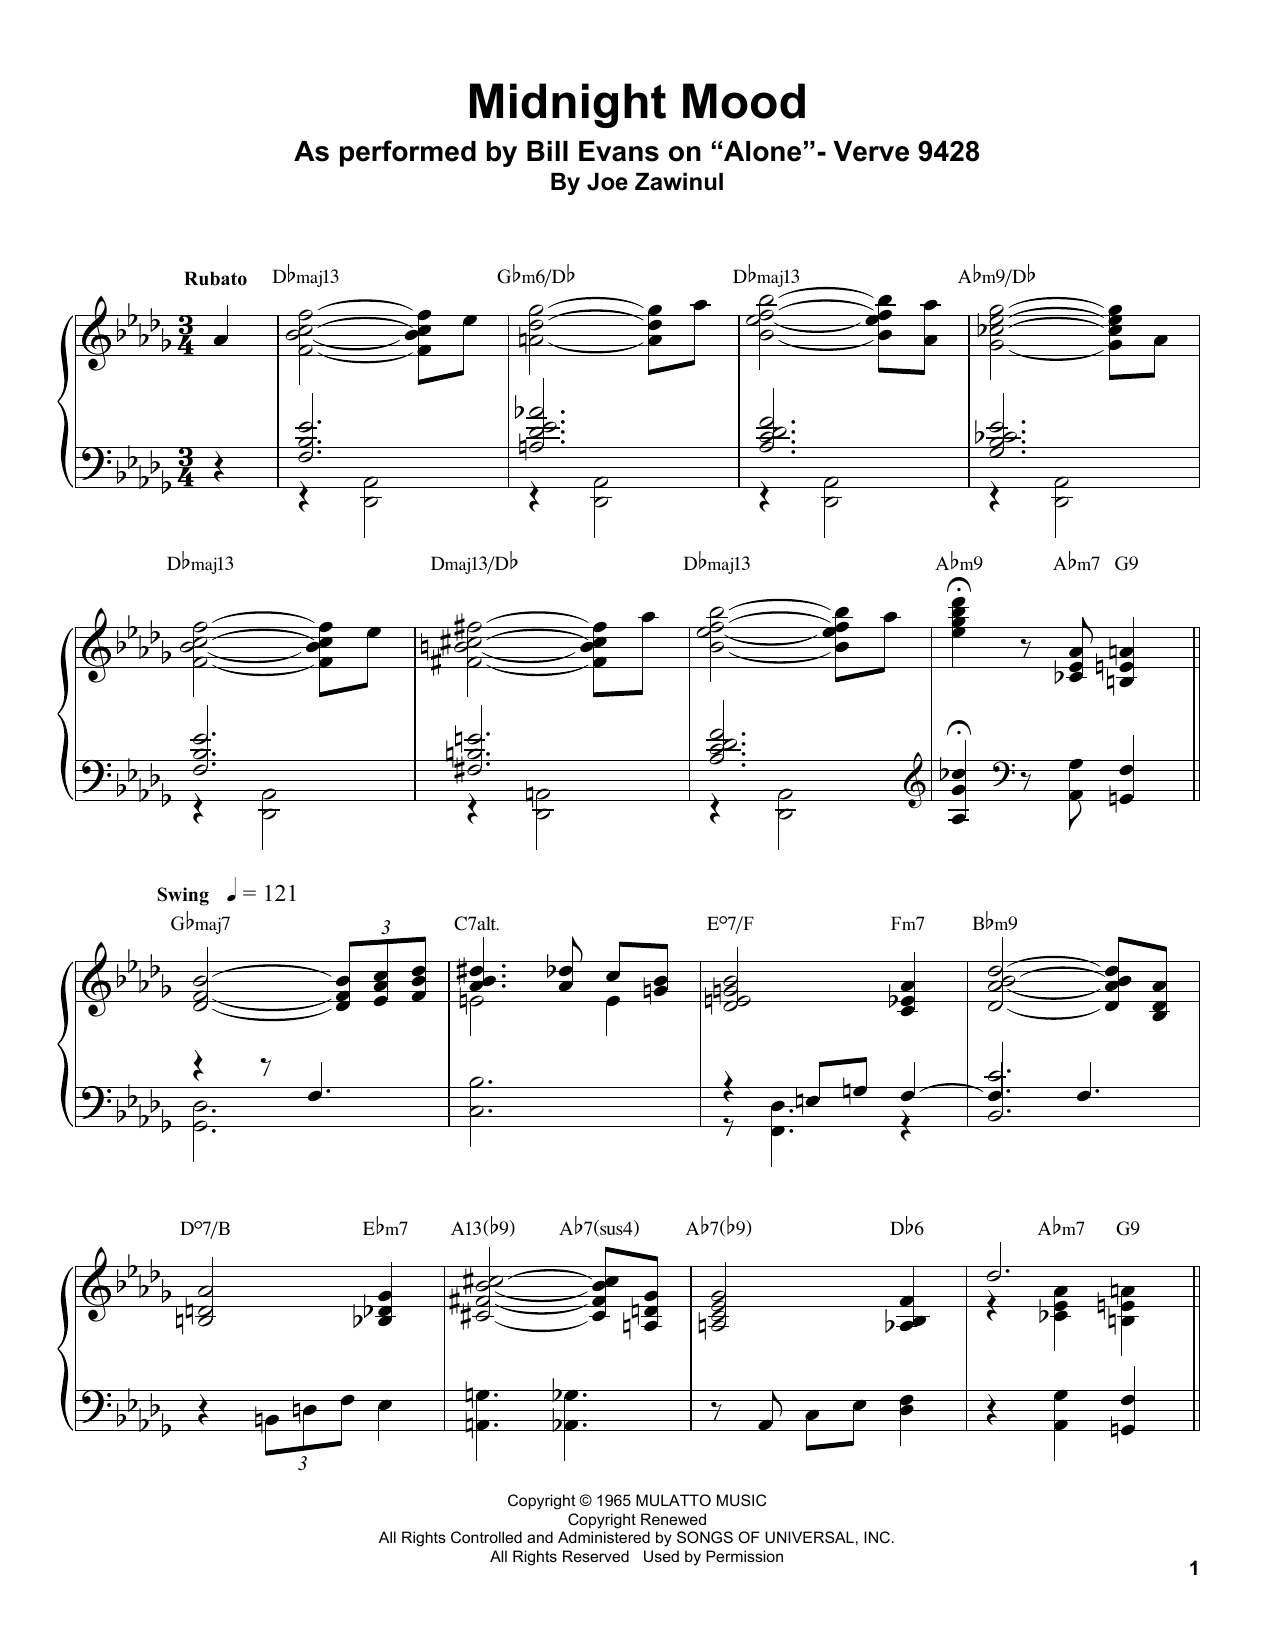 Bill Evans Midnight Mood sheet music notes and chords. Download Printable PDF.